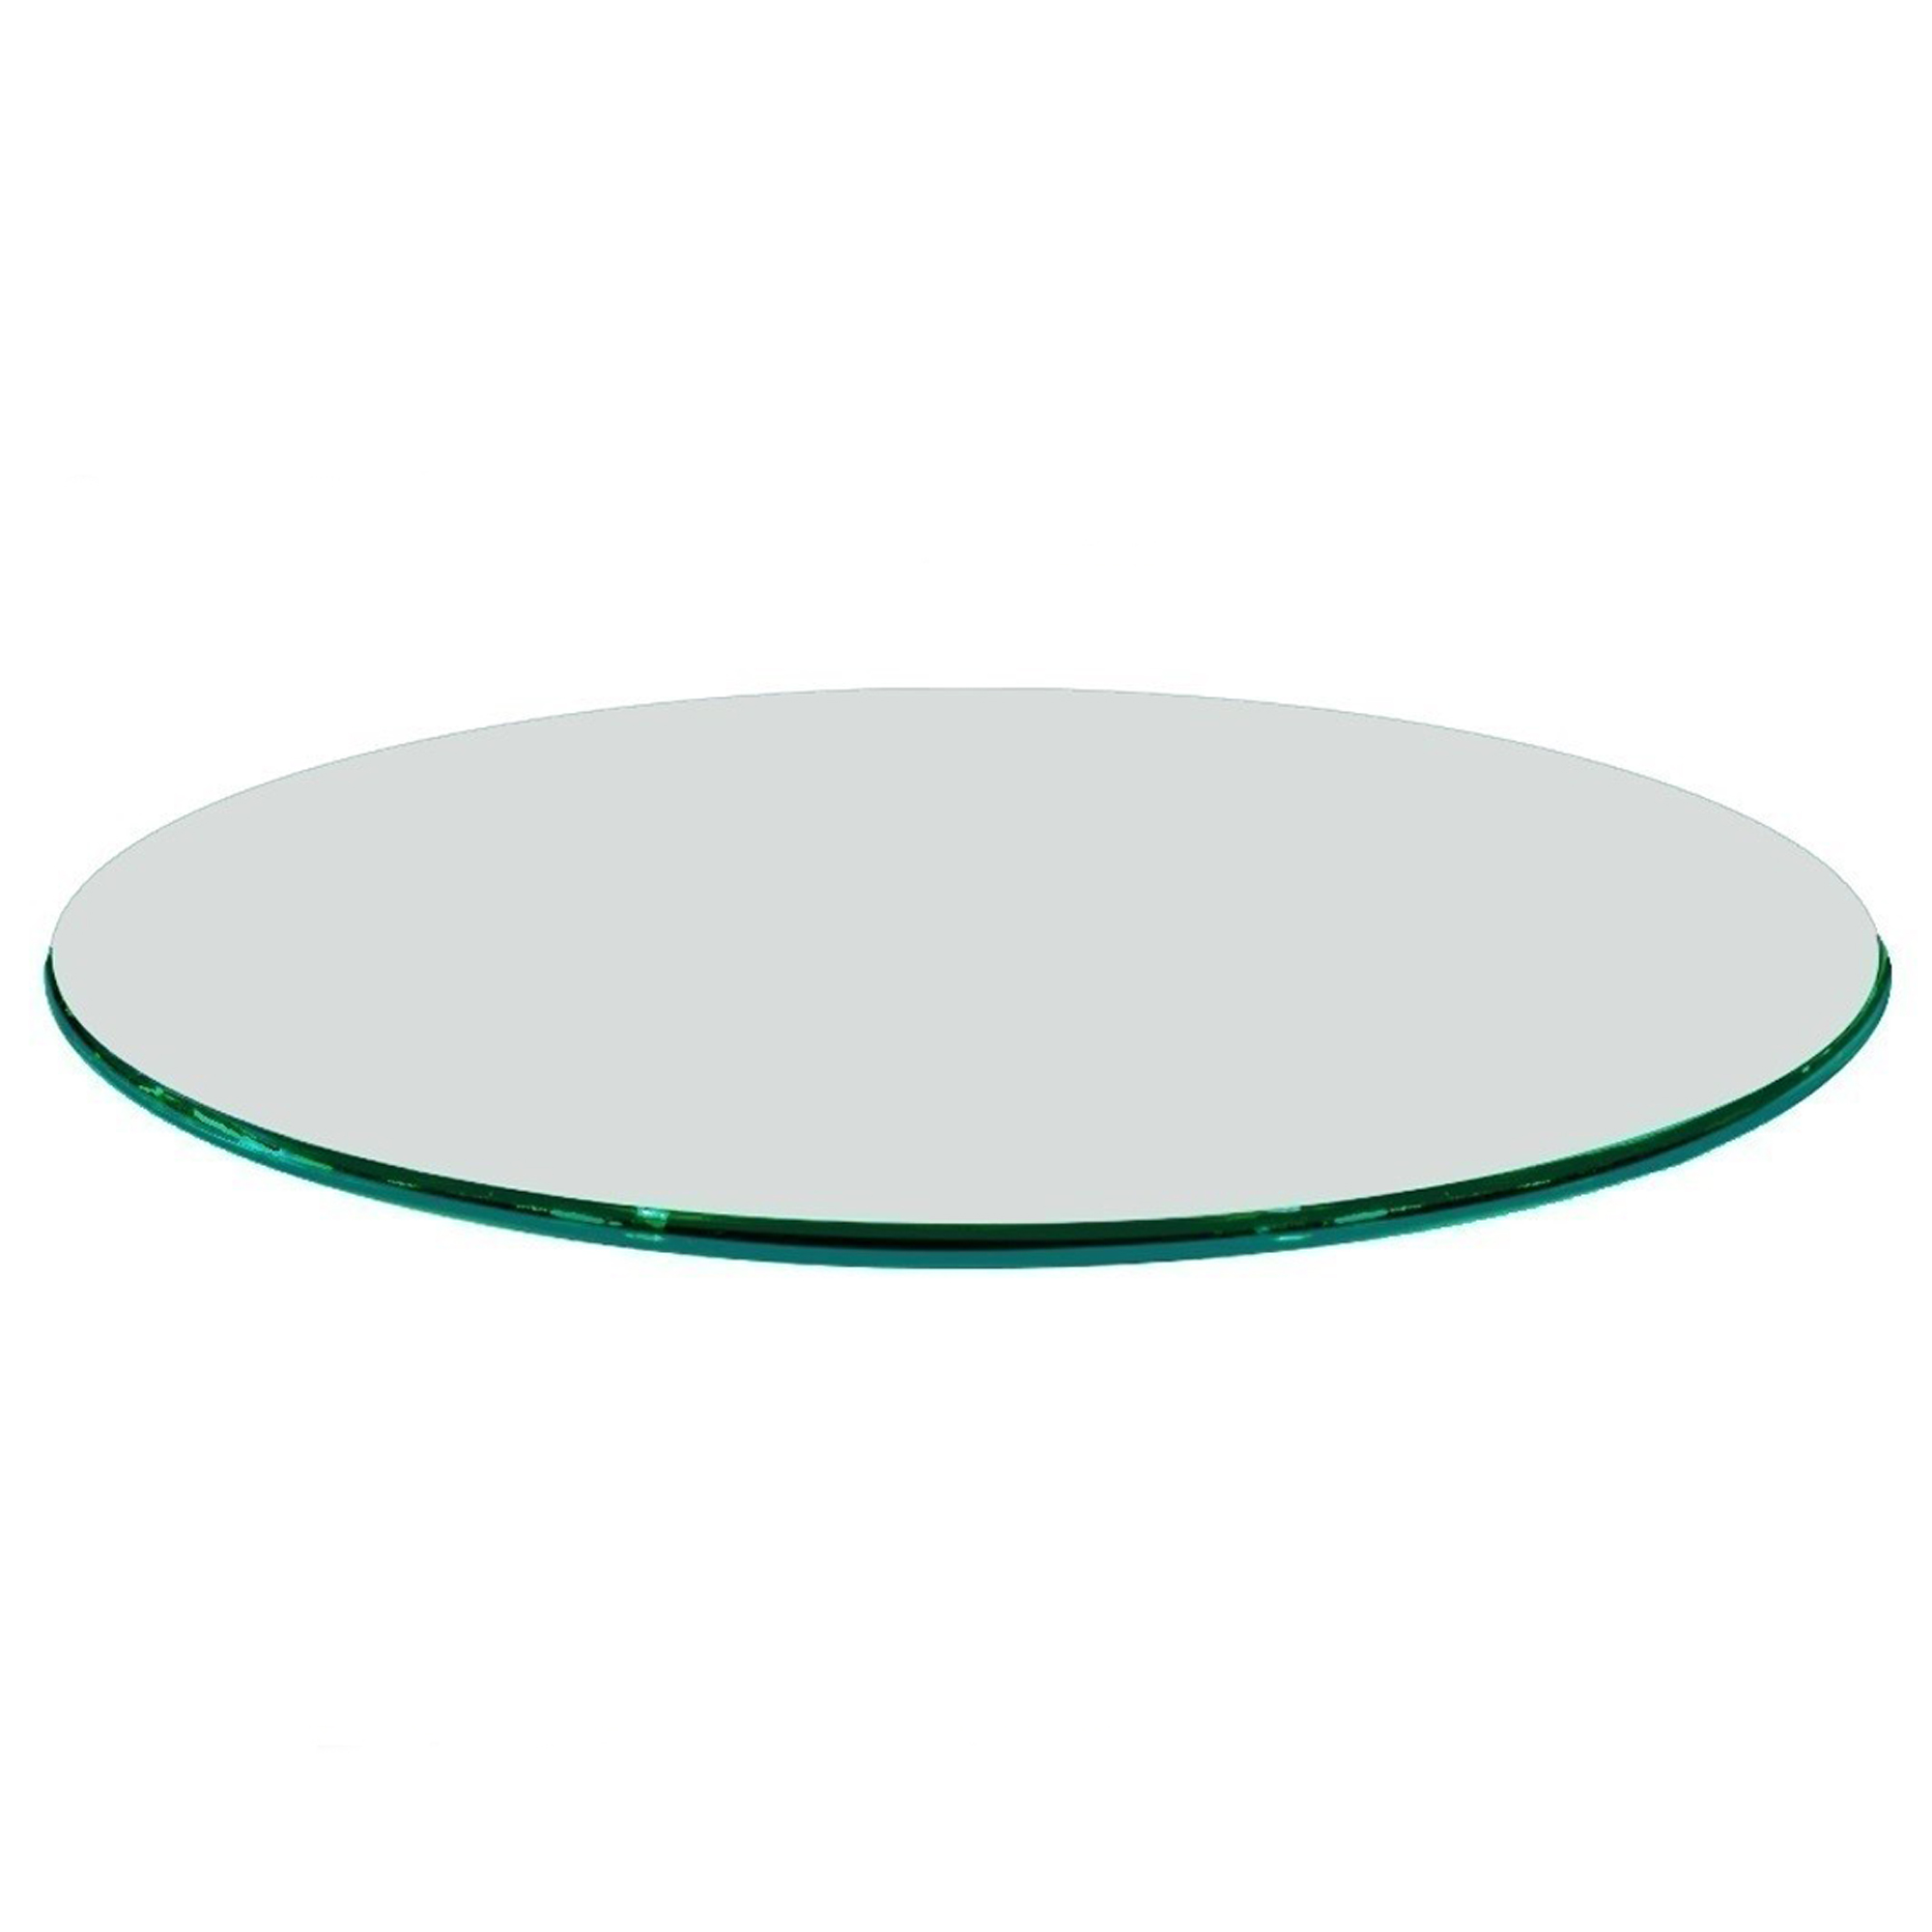 Glass Table Top 24 Inch Round 1 2, 24 Inch Round Glass Table Cover